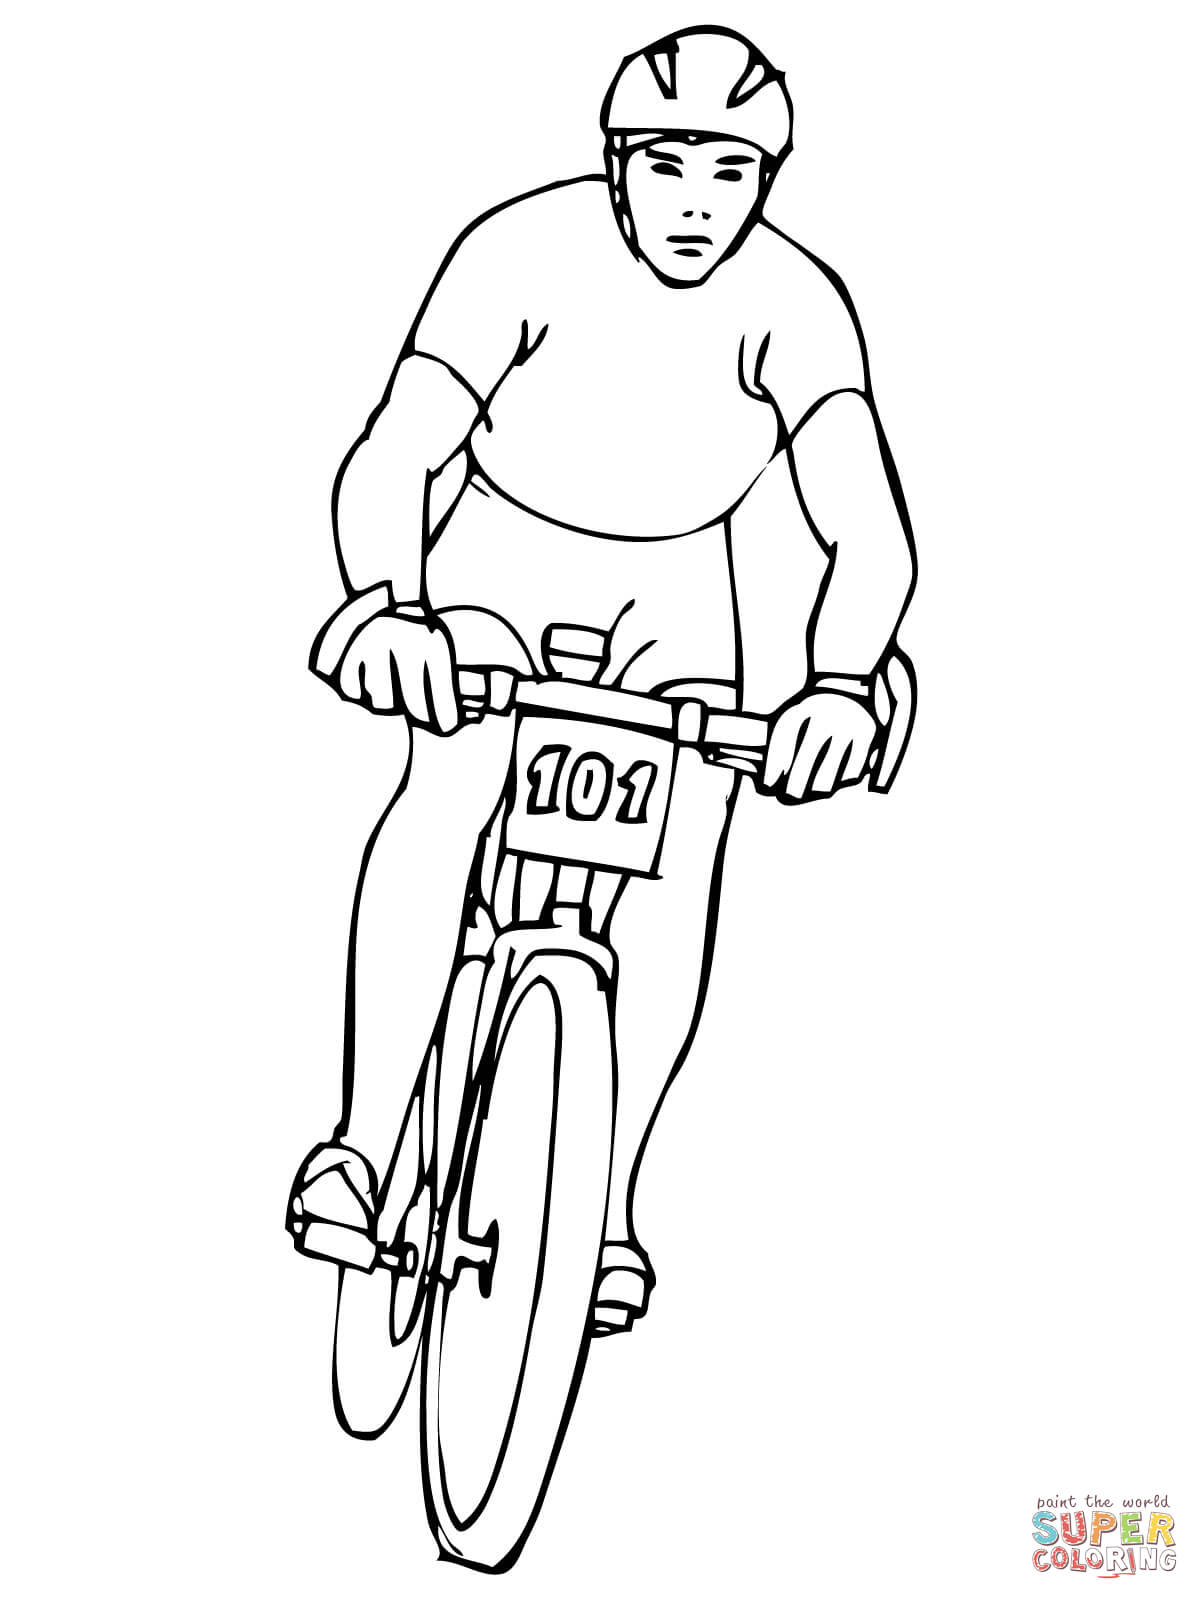 38+ Bike Coloring Pages For Kids PNG - Free Coloring Pages